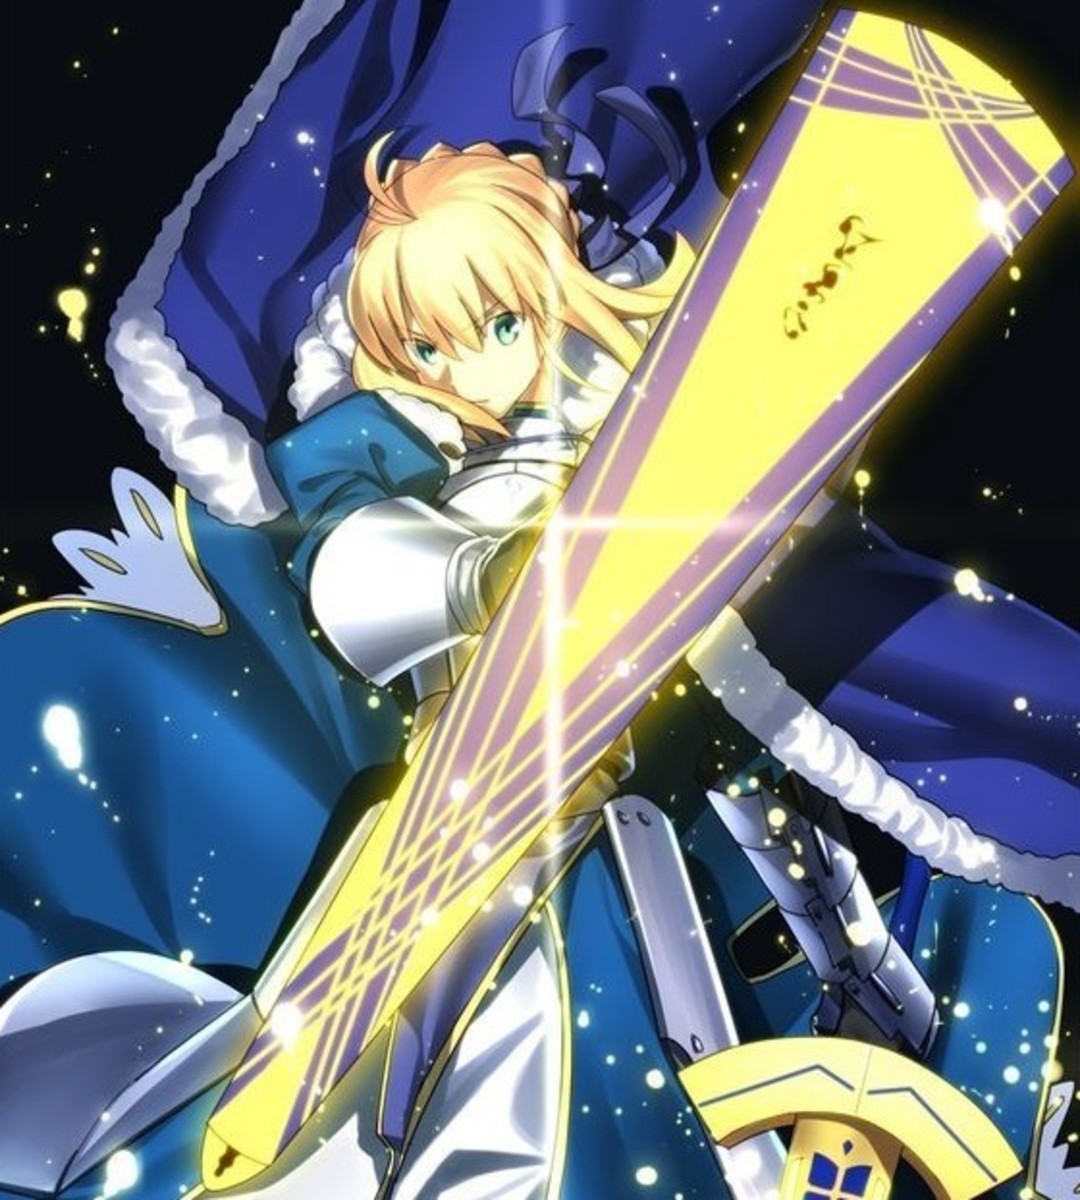 Saber with Avalon